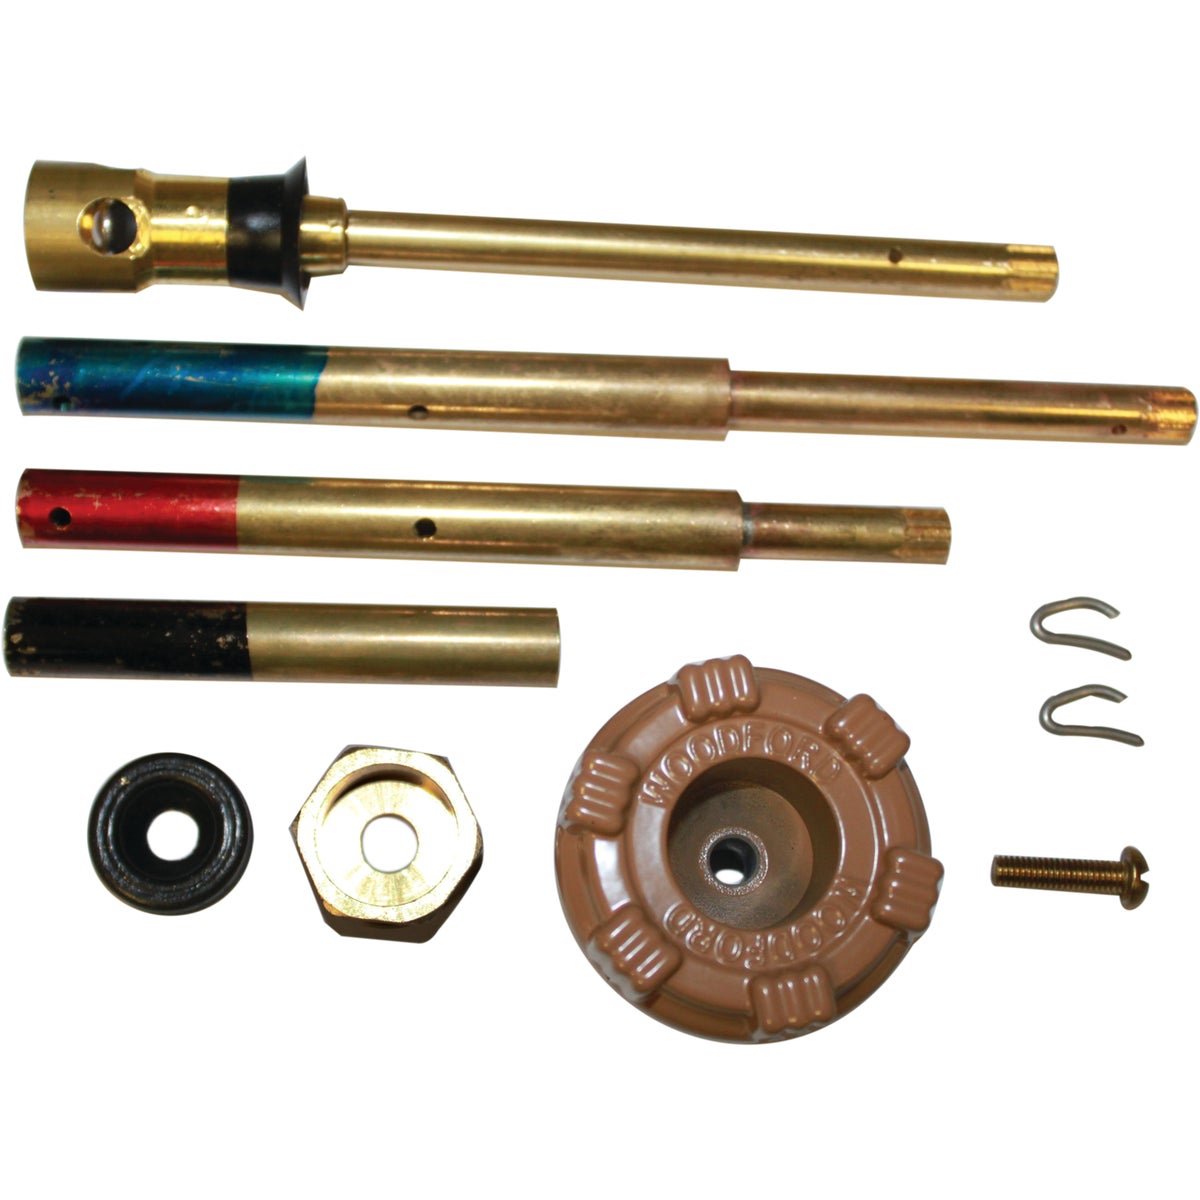 Woodford Wall Hydrant Rod & Pressure Relief Valve Repair Kit (10-Pieces)